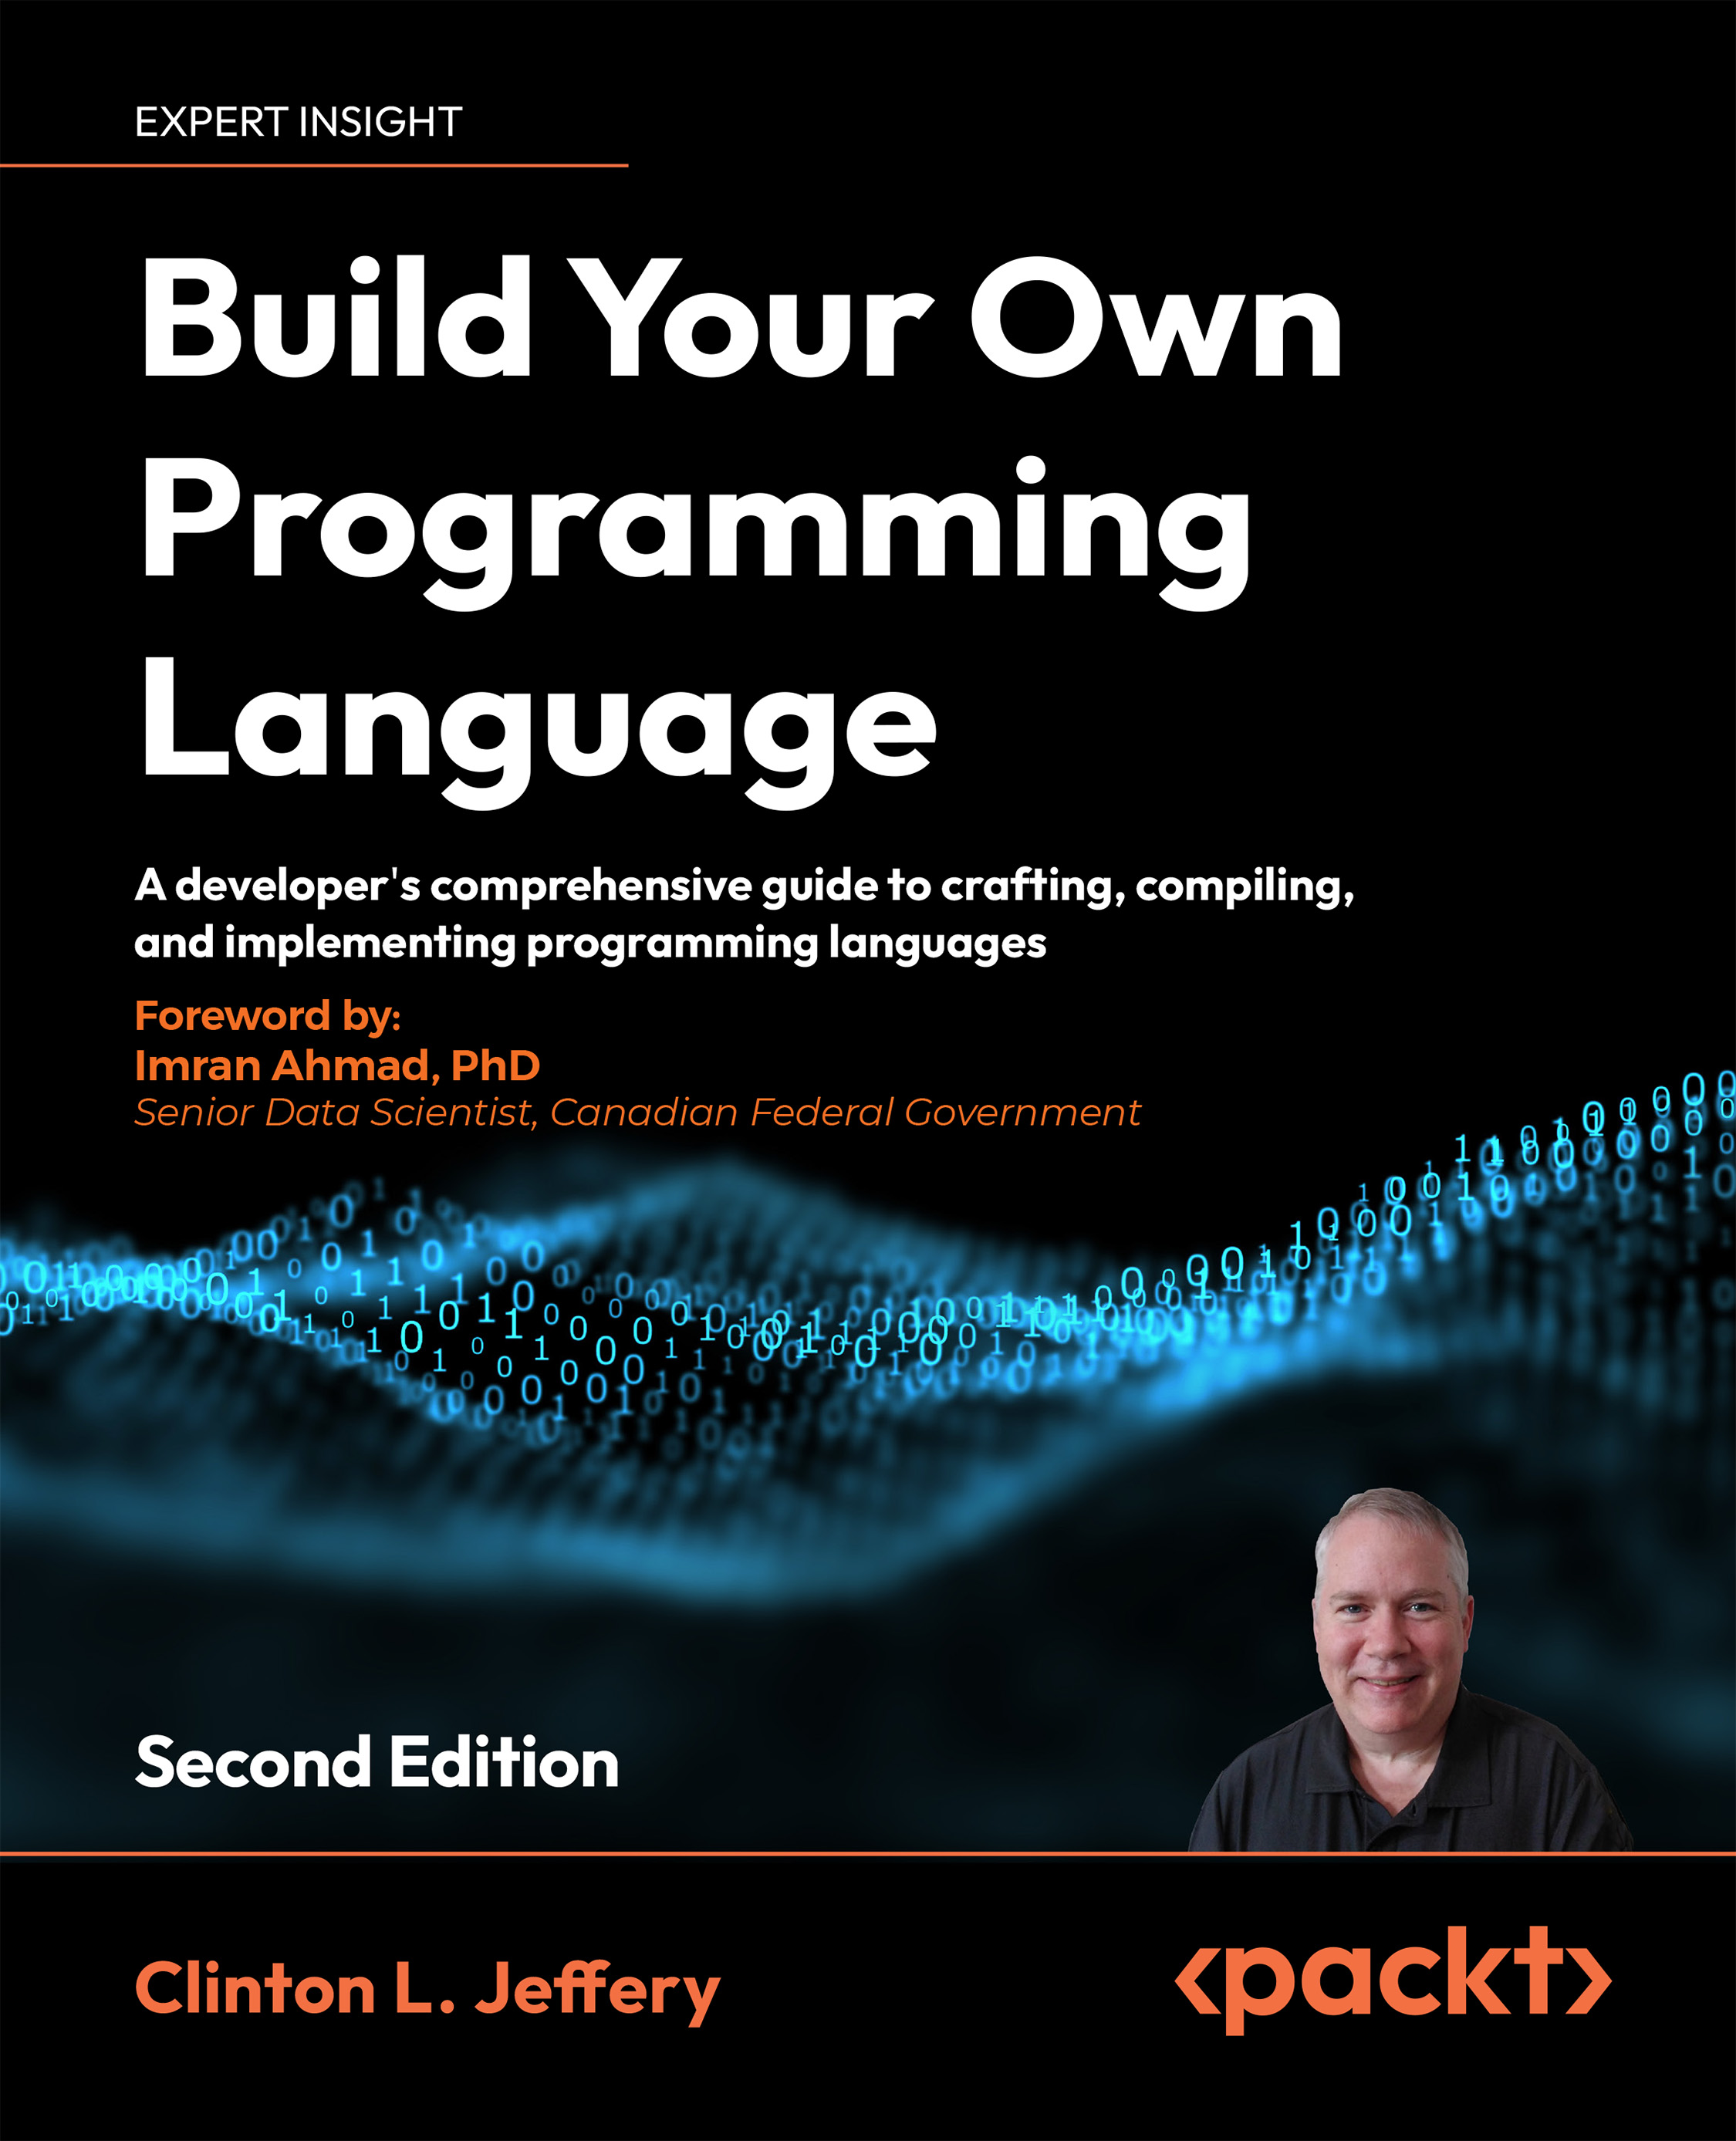 Build Your Own Programming Language